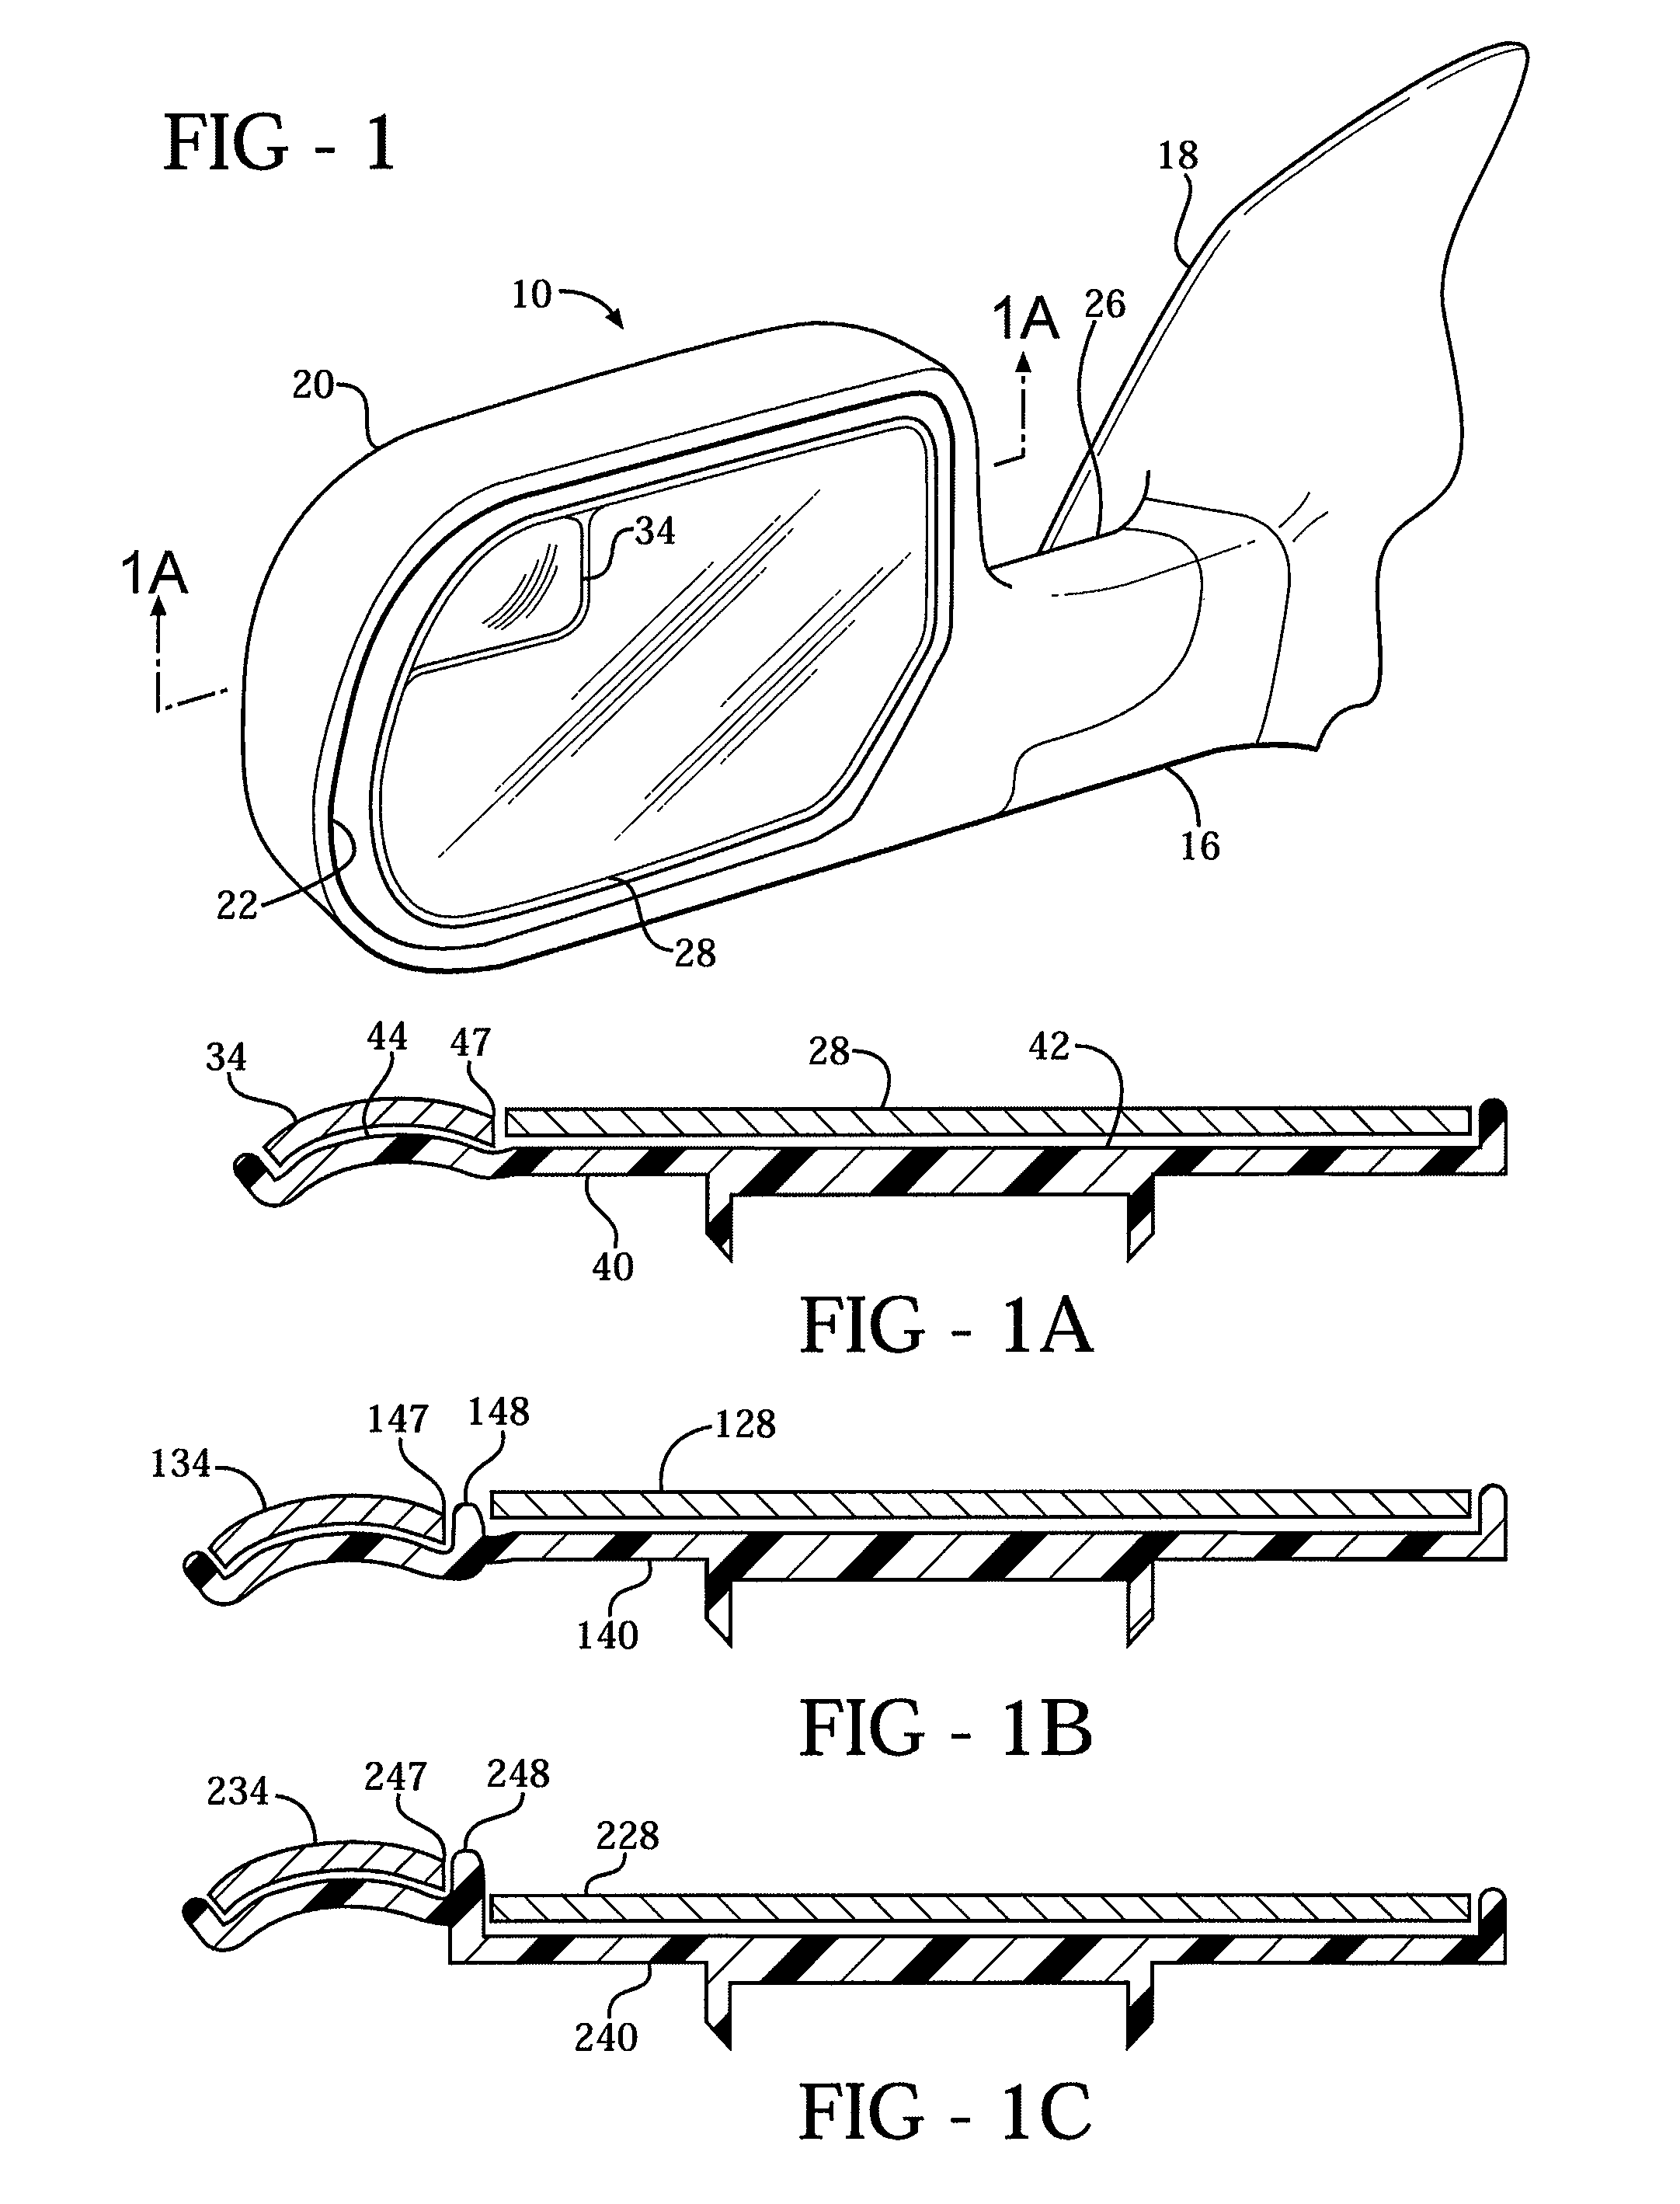 Exterior rearview mirror for motor vehicles